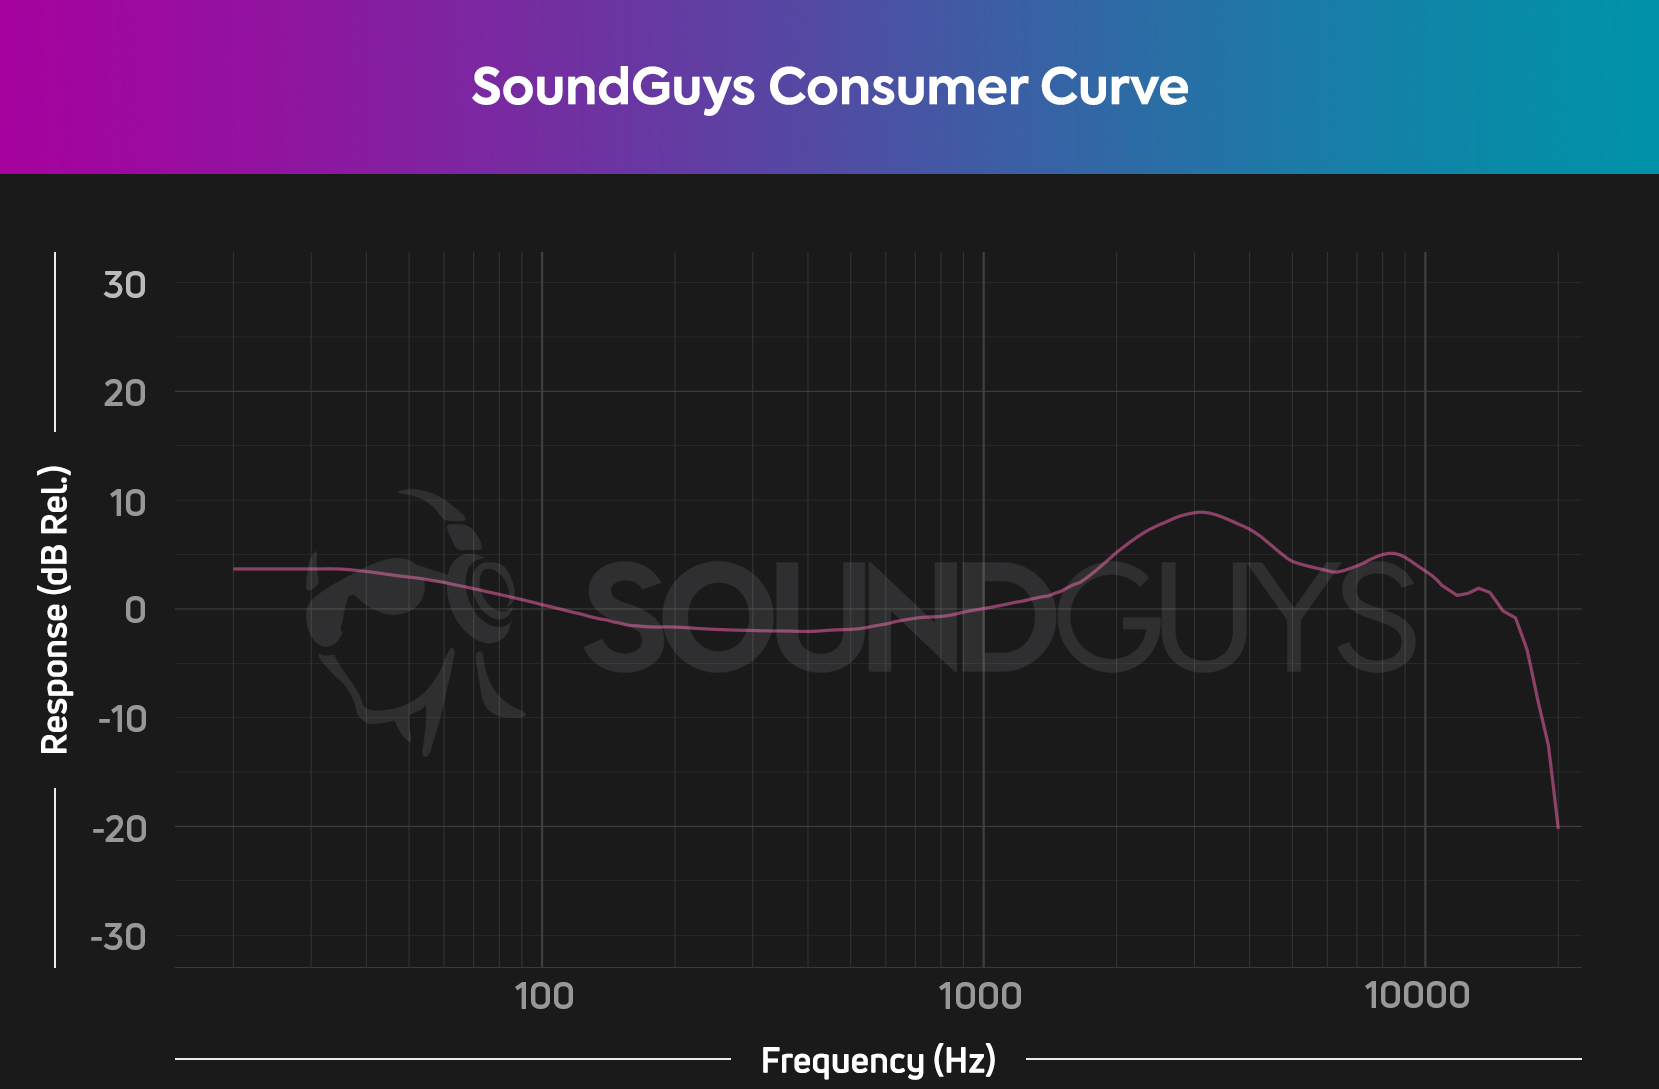 The SoundGuys Consumer Curve in pink.